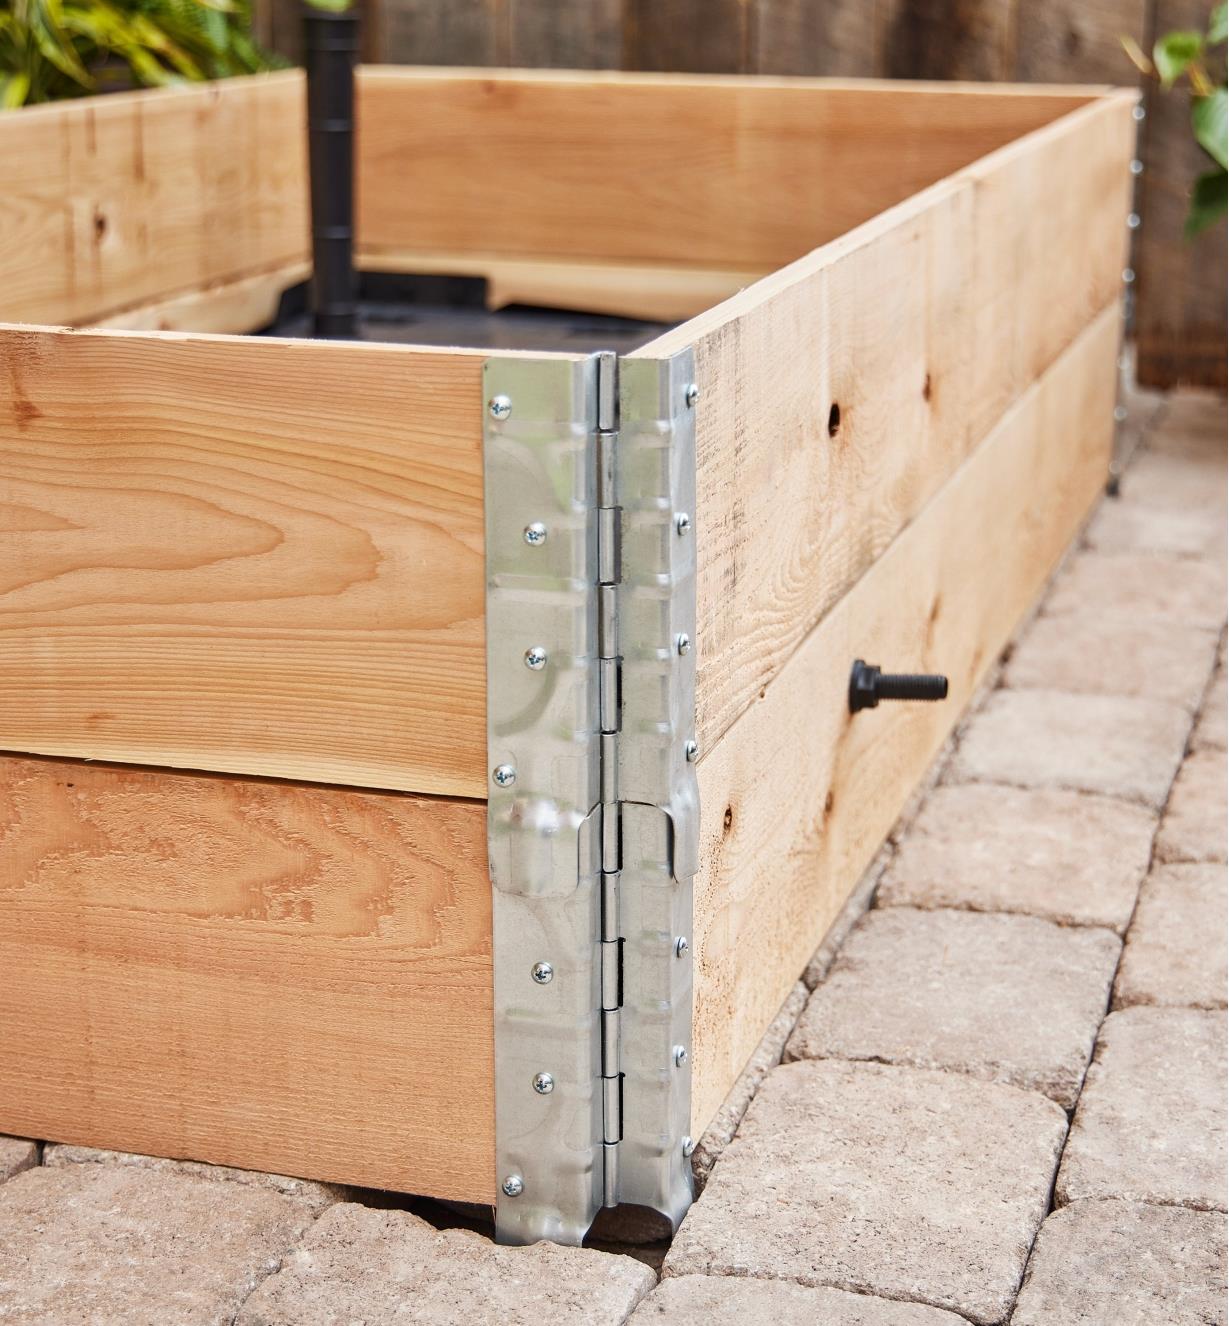 A two-tier wooden frame is built with steel stacking corners from the self-watering raised bed kit